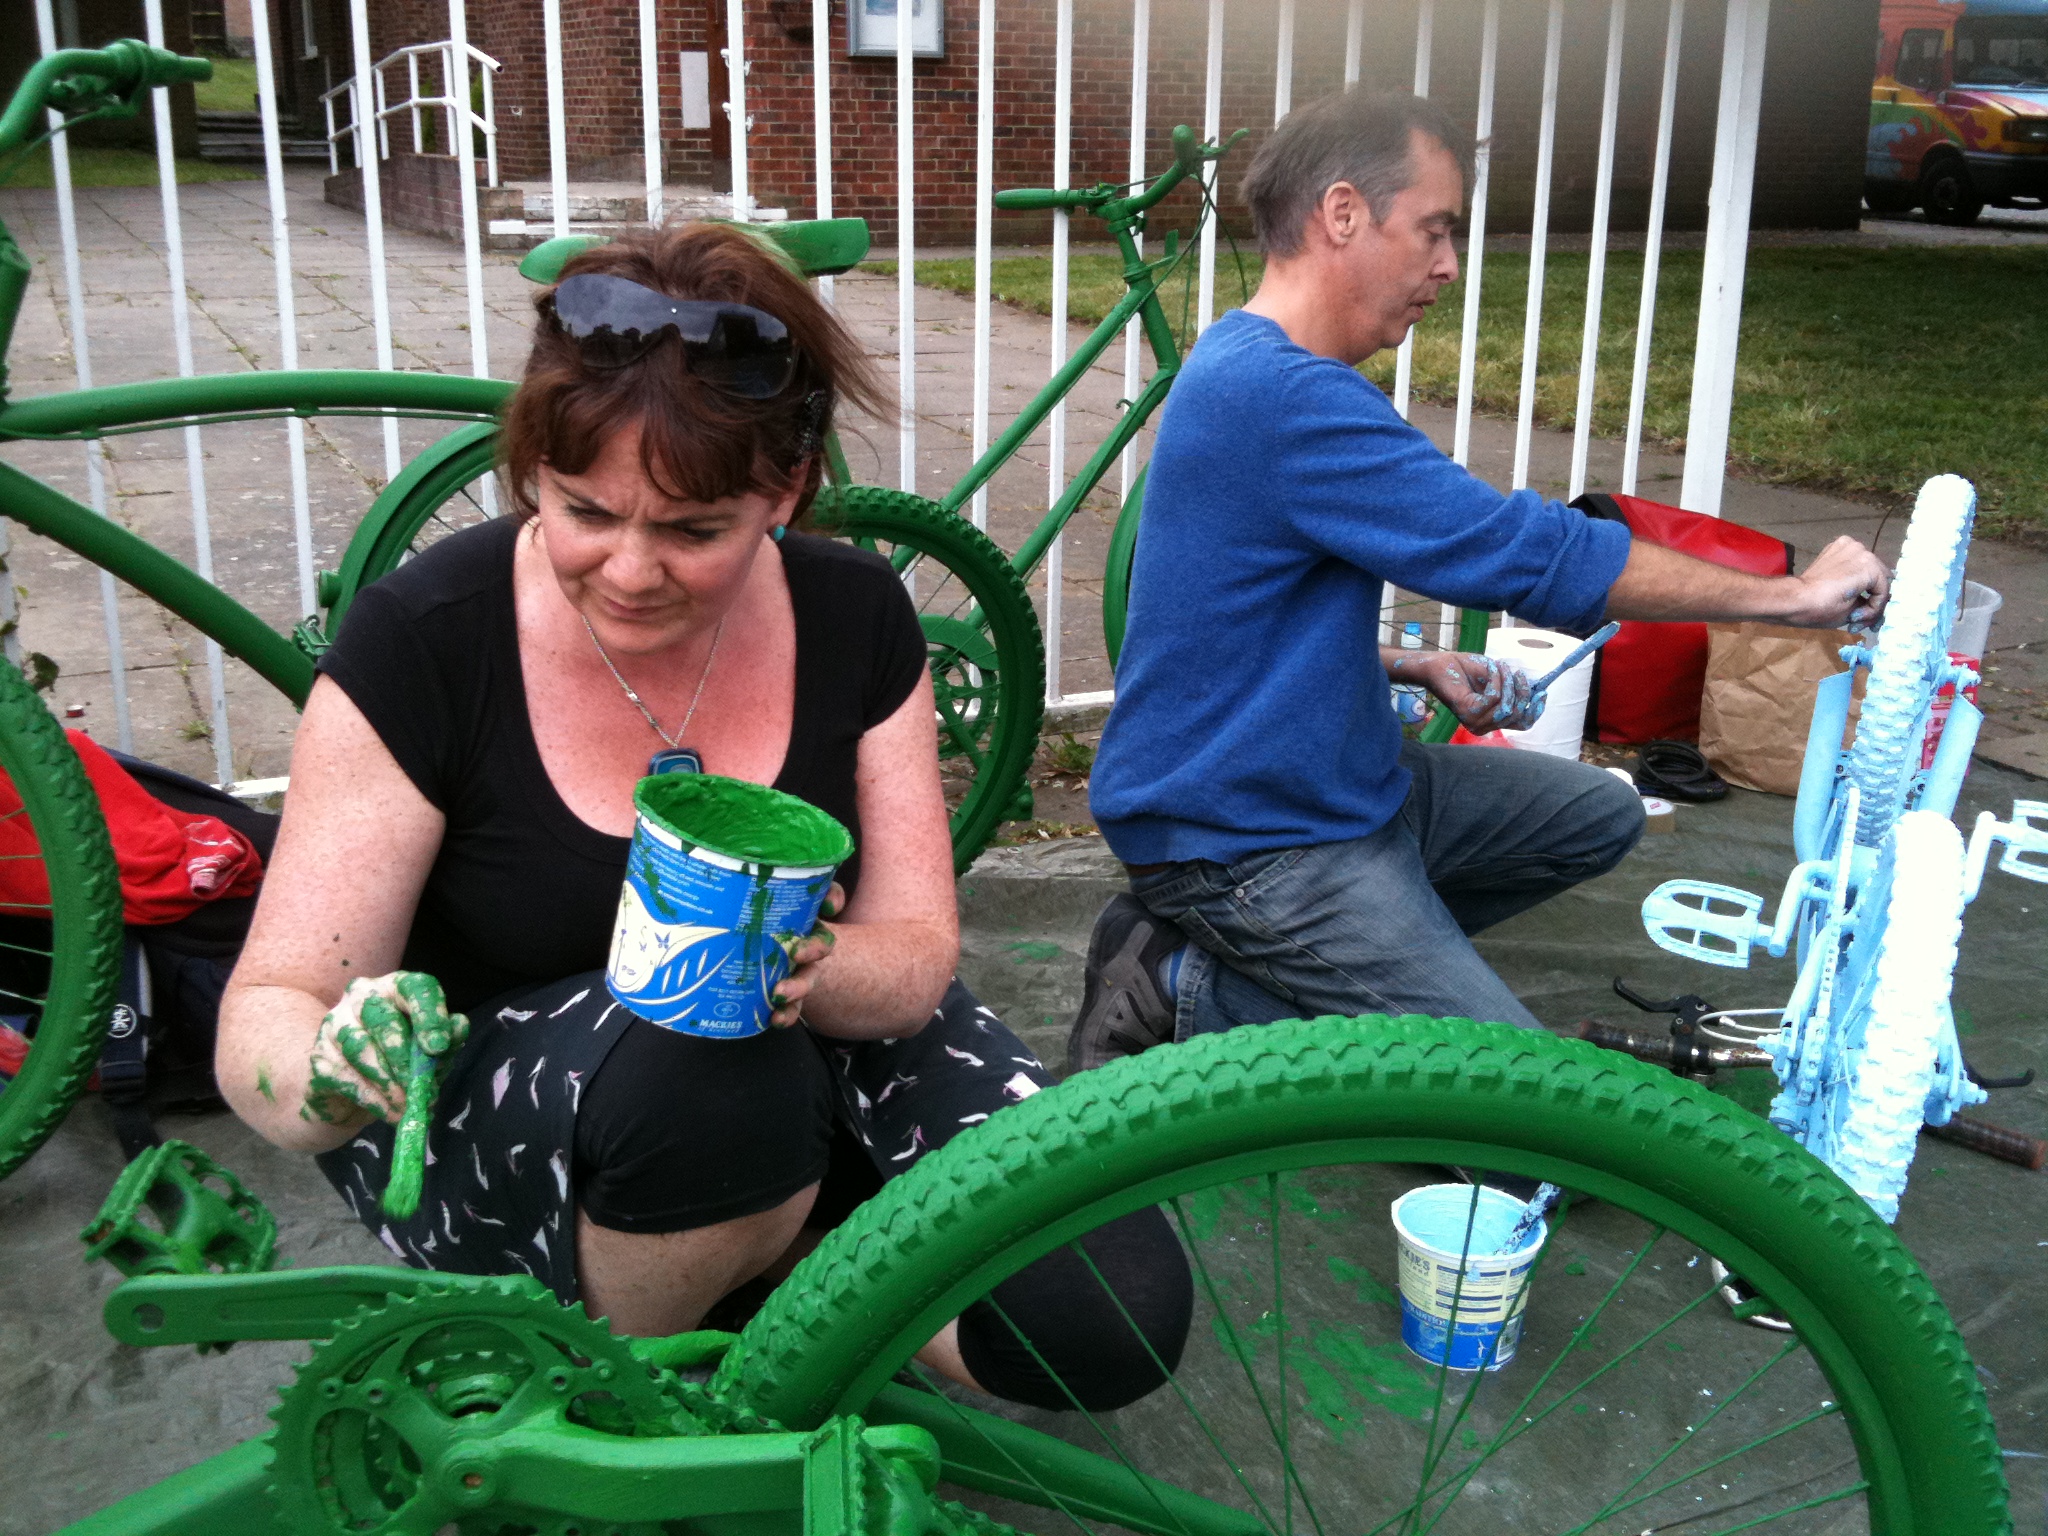 Maria and Ray paint bikes tree green and sky blue